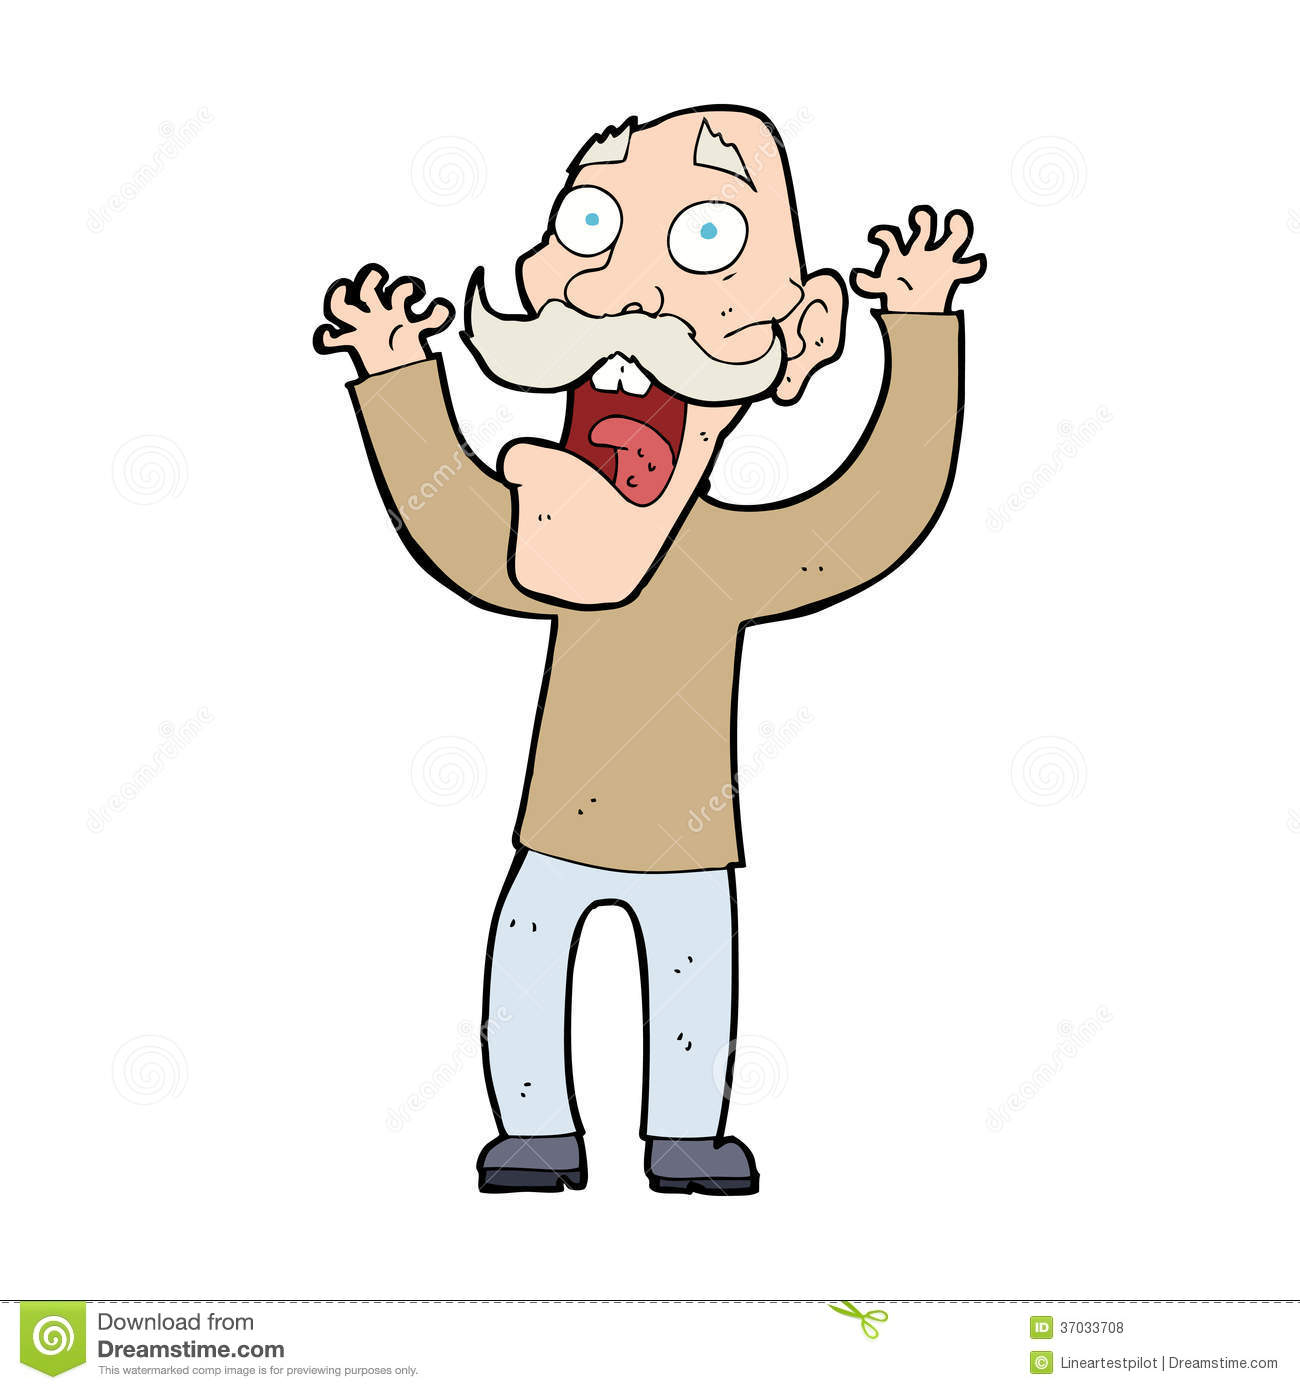 Cartoon Old Man Getting A Fright Royalty Free Stock Photos   Image